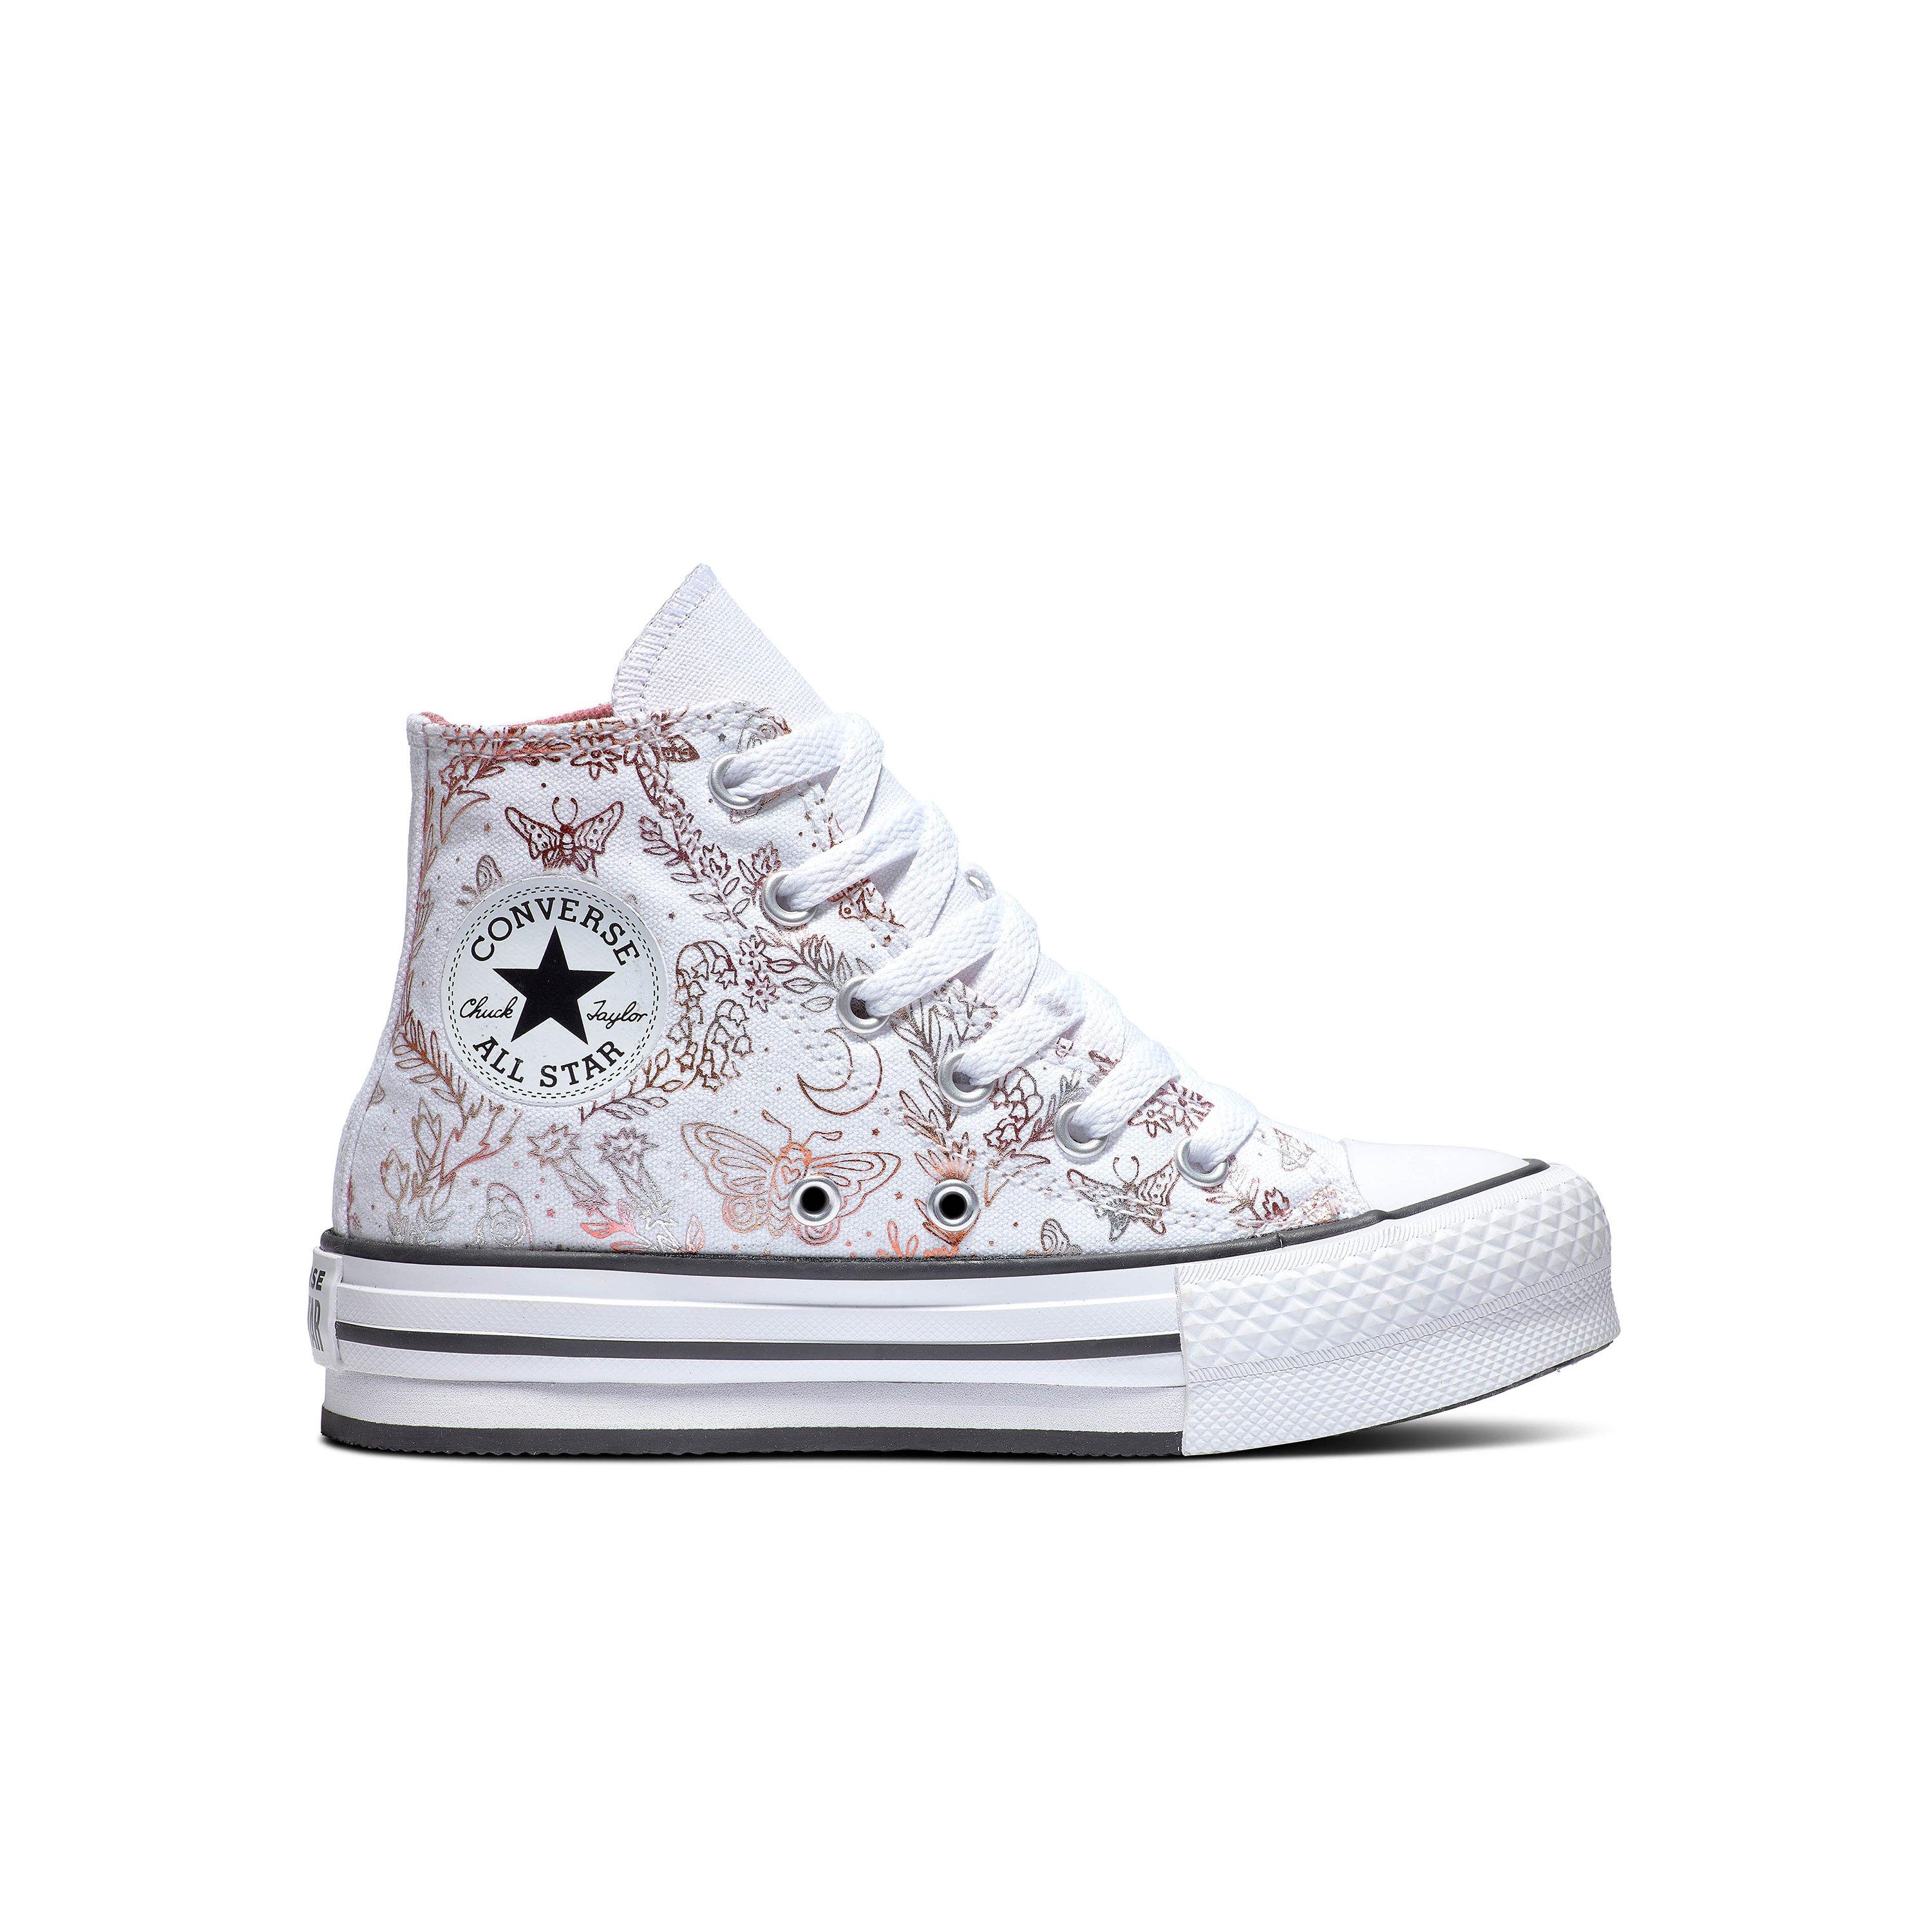 AirbrushBrothers Airbrush Butterfly Quince Converse 11 Preschool